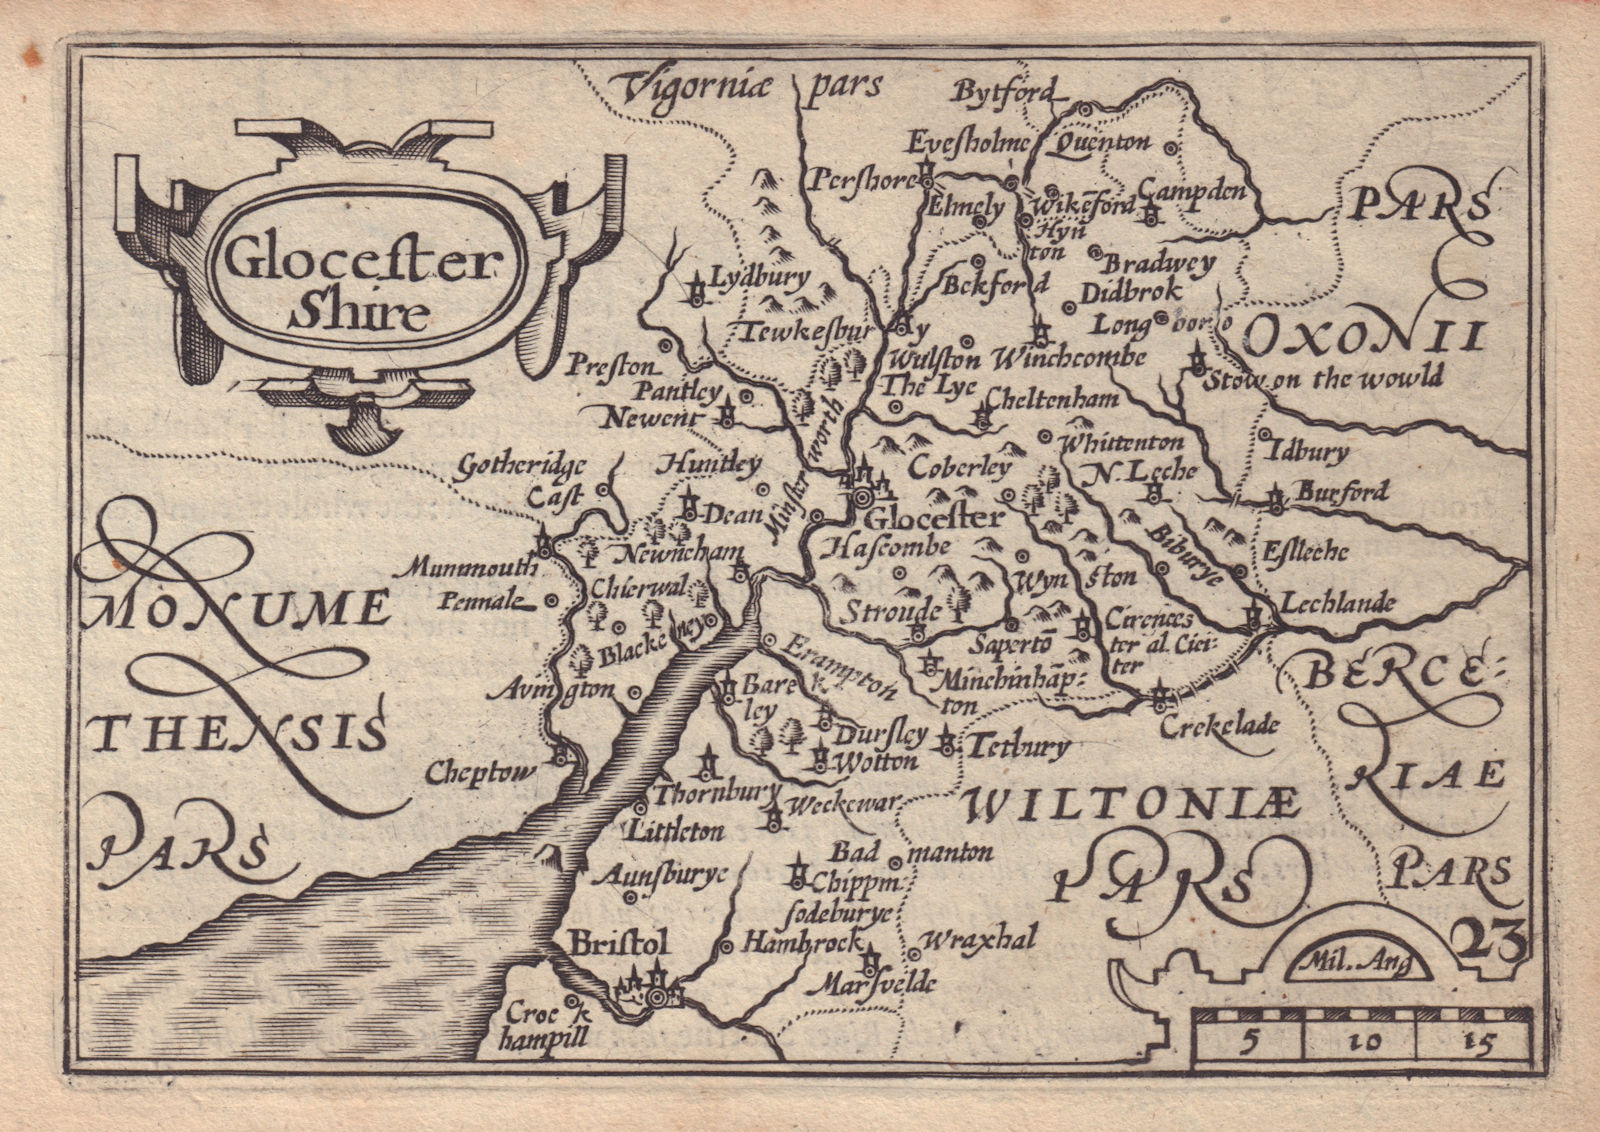 Associate Product Glocester Shire by Keere. "Speed miniature" Gloucestershire county map 1632